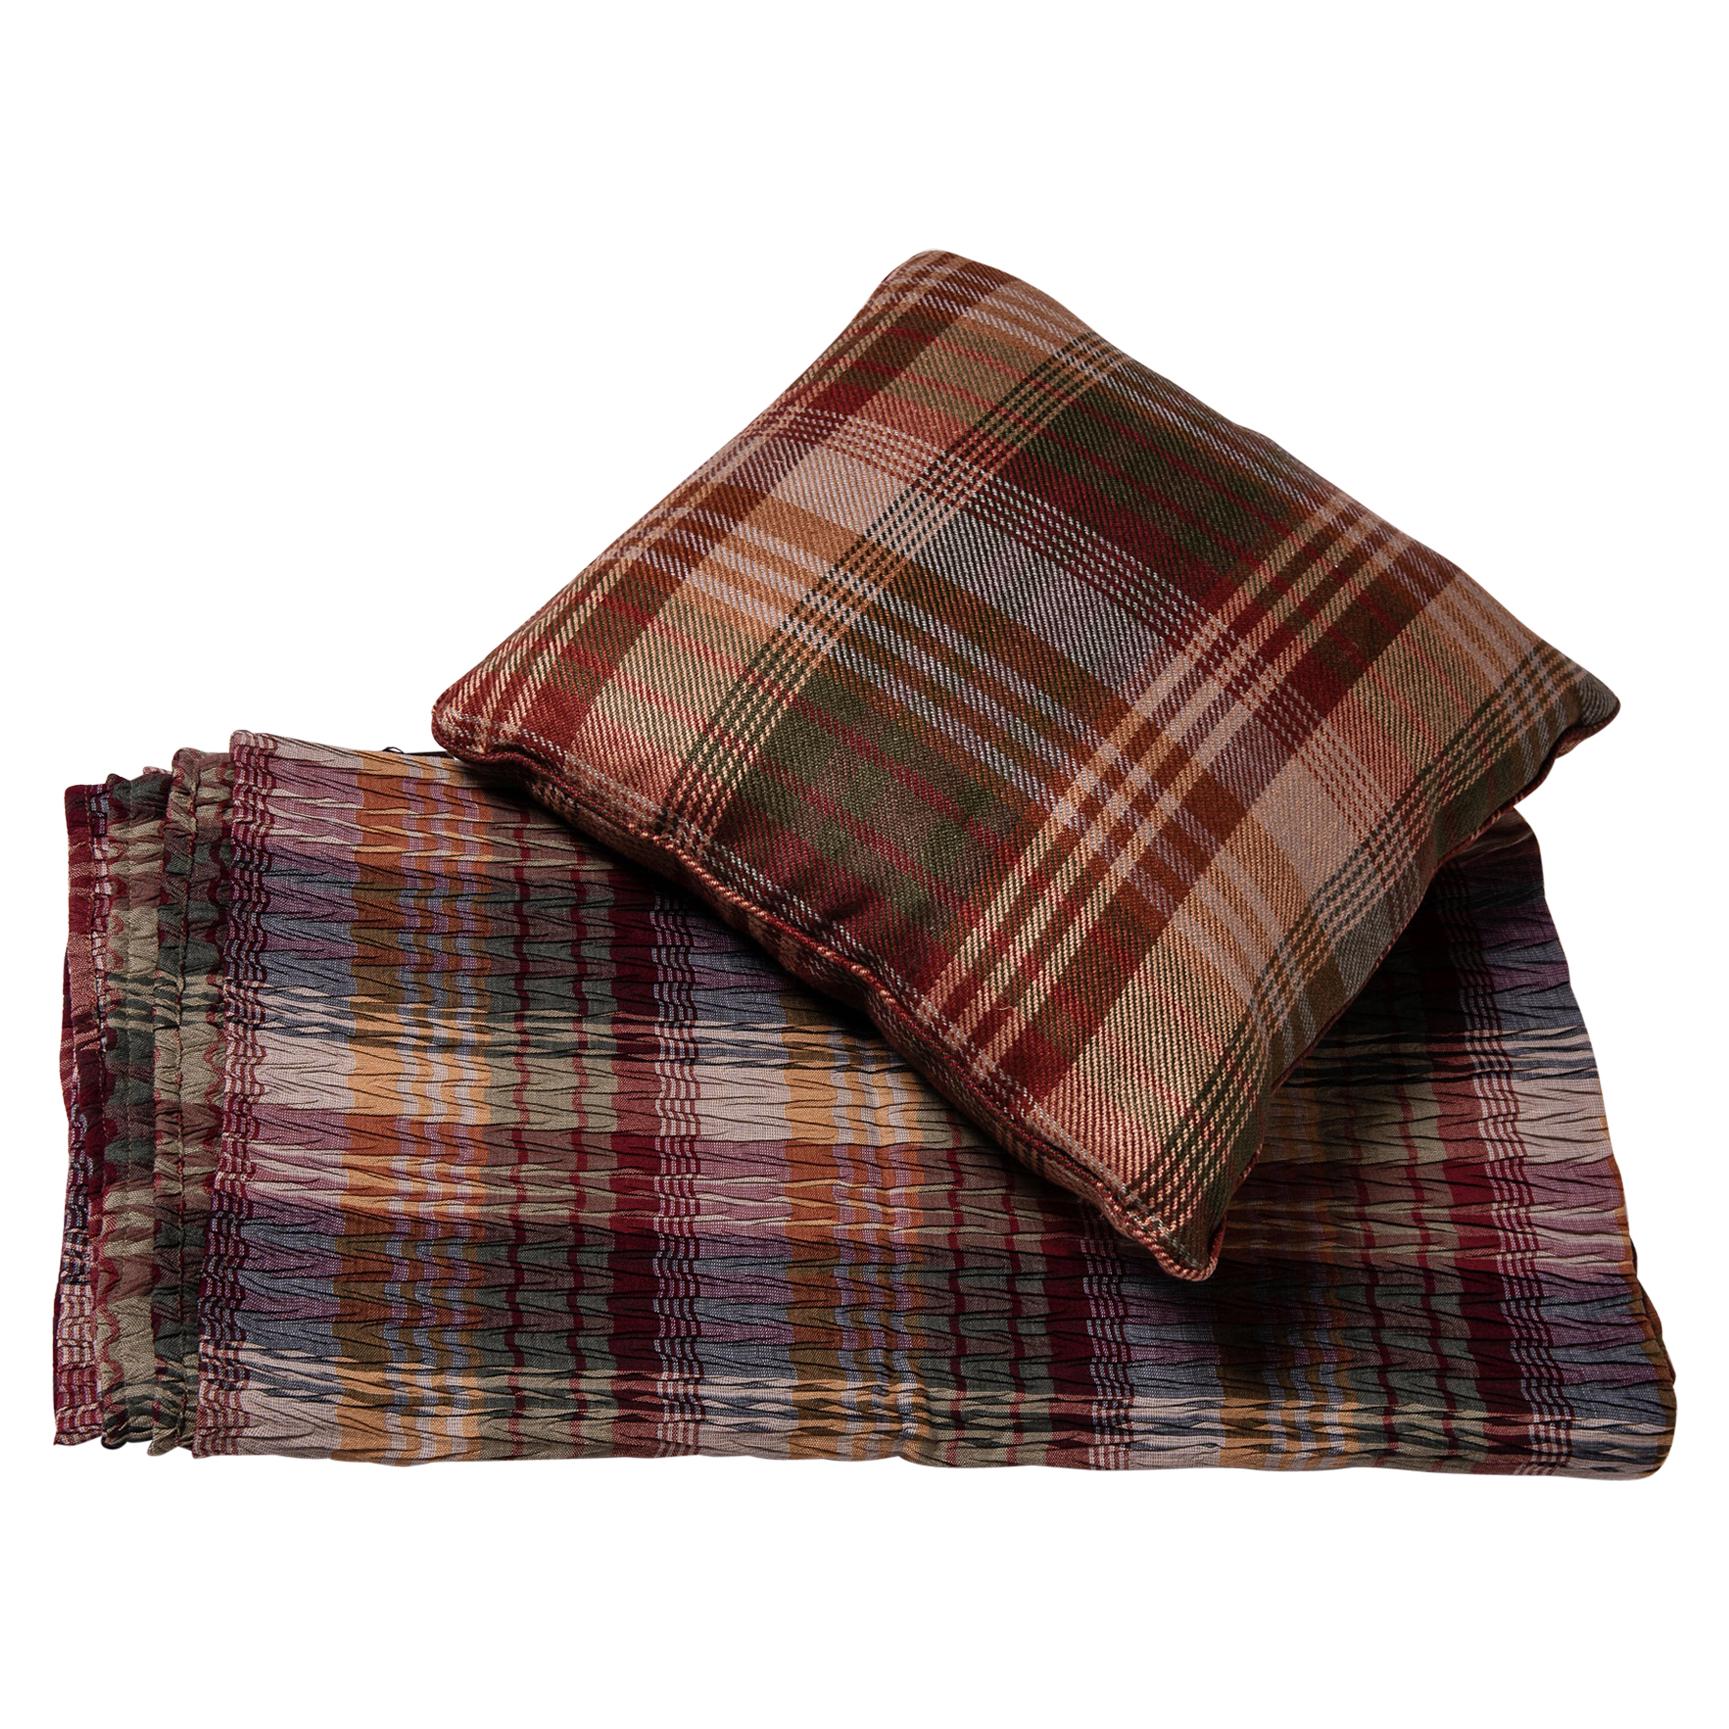   MULBERRY Tartan Cover or Plaid with Pillow  For Sale